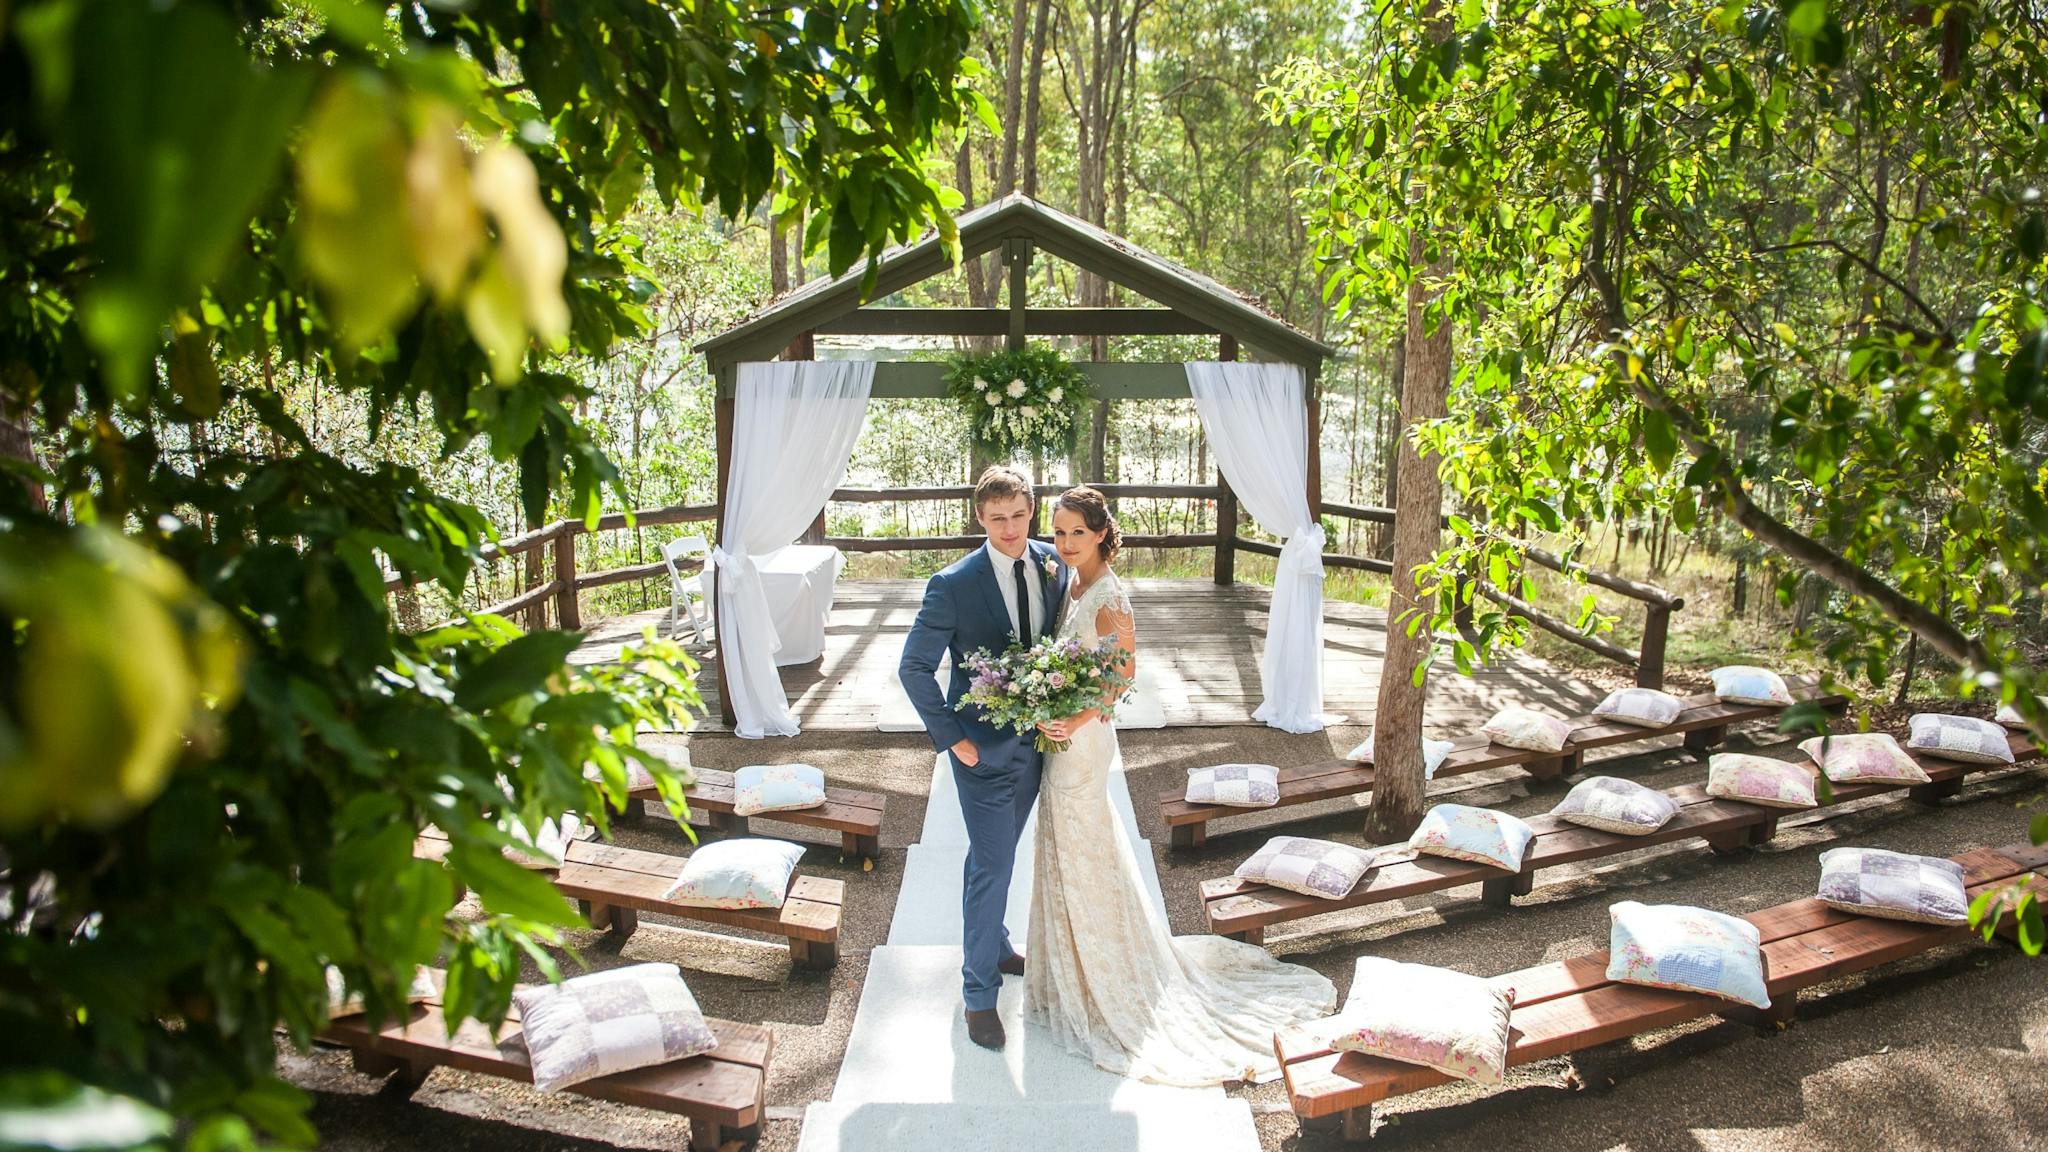 Bride and groom at the Lakeview wedding ceremony space surrounded by rainforest